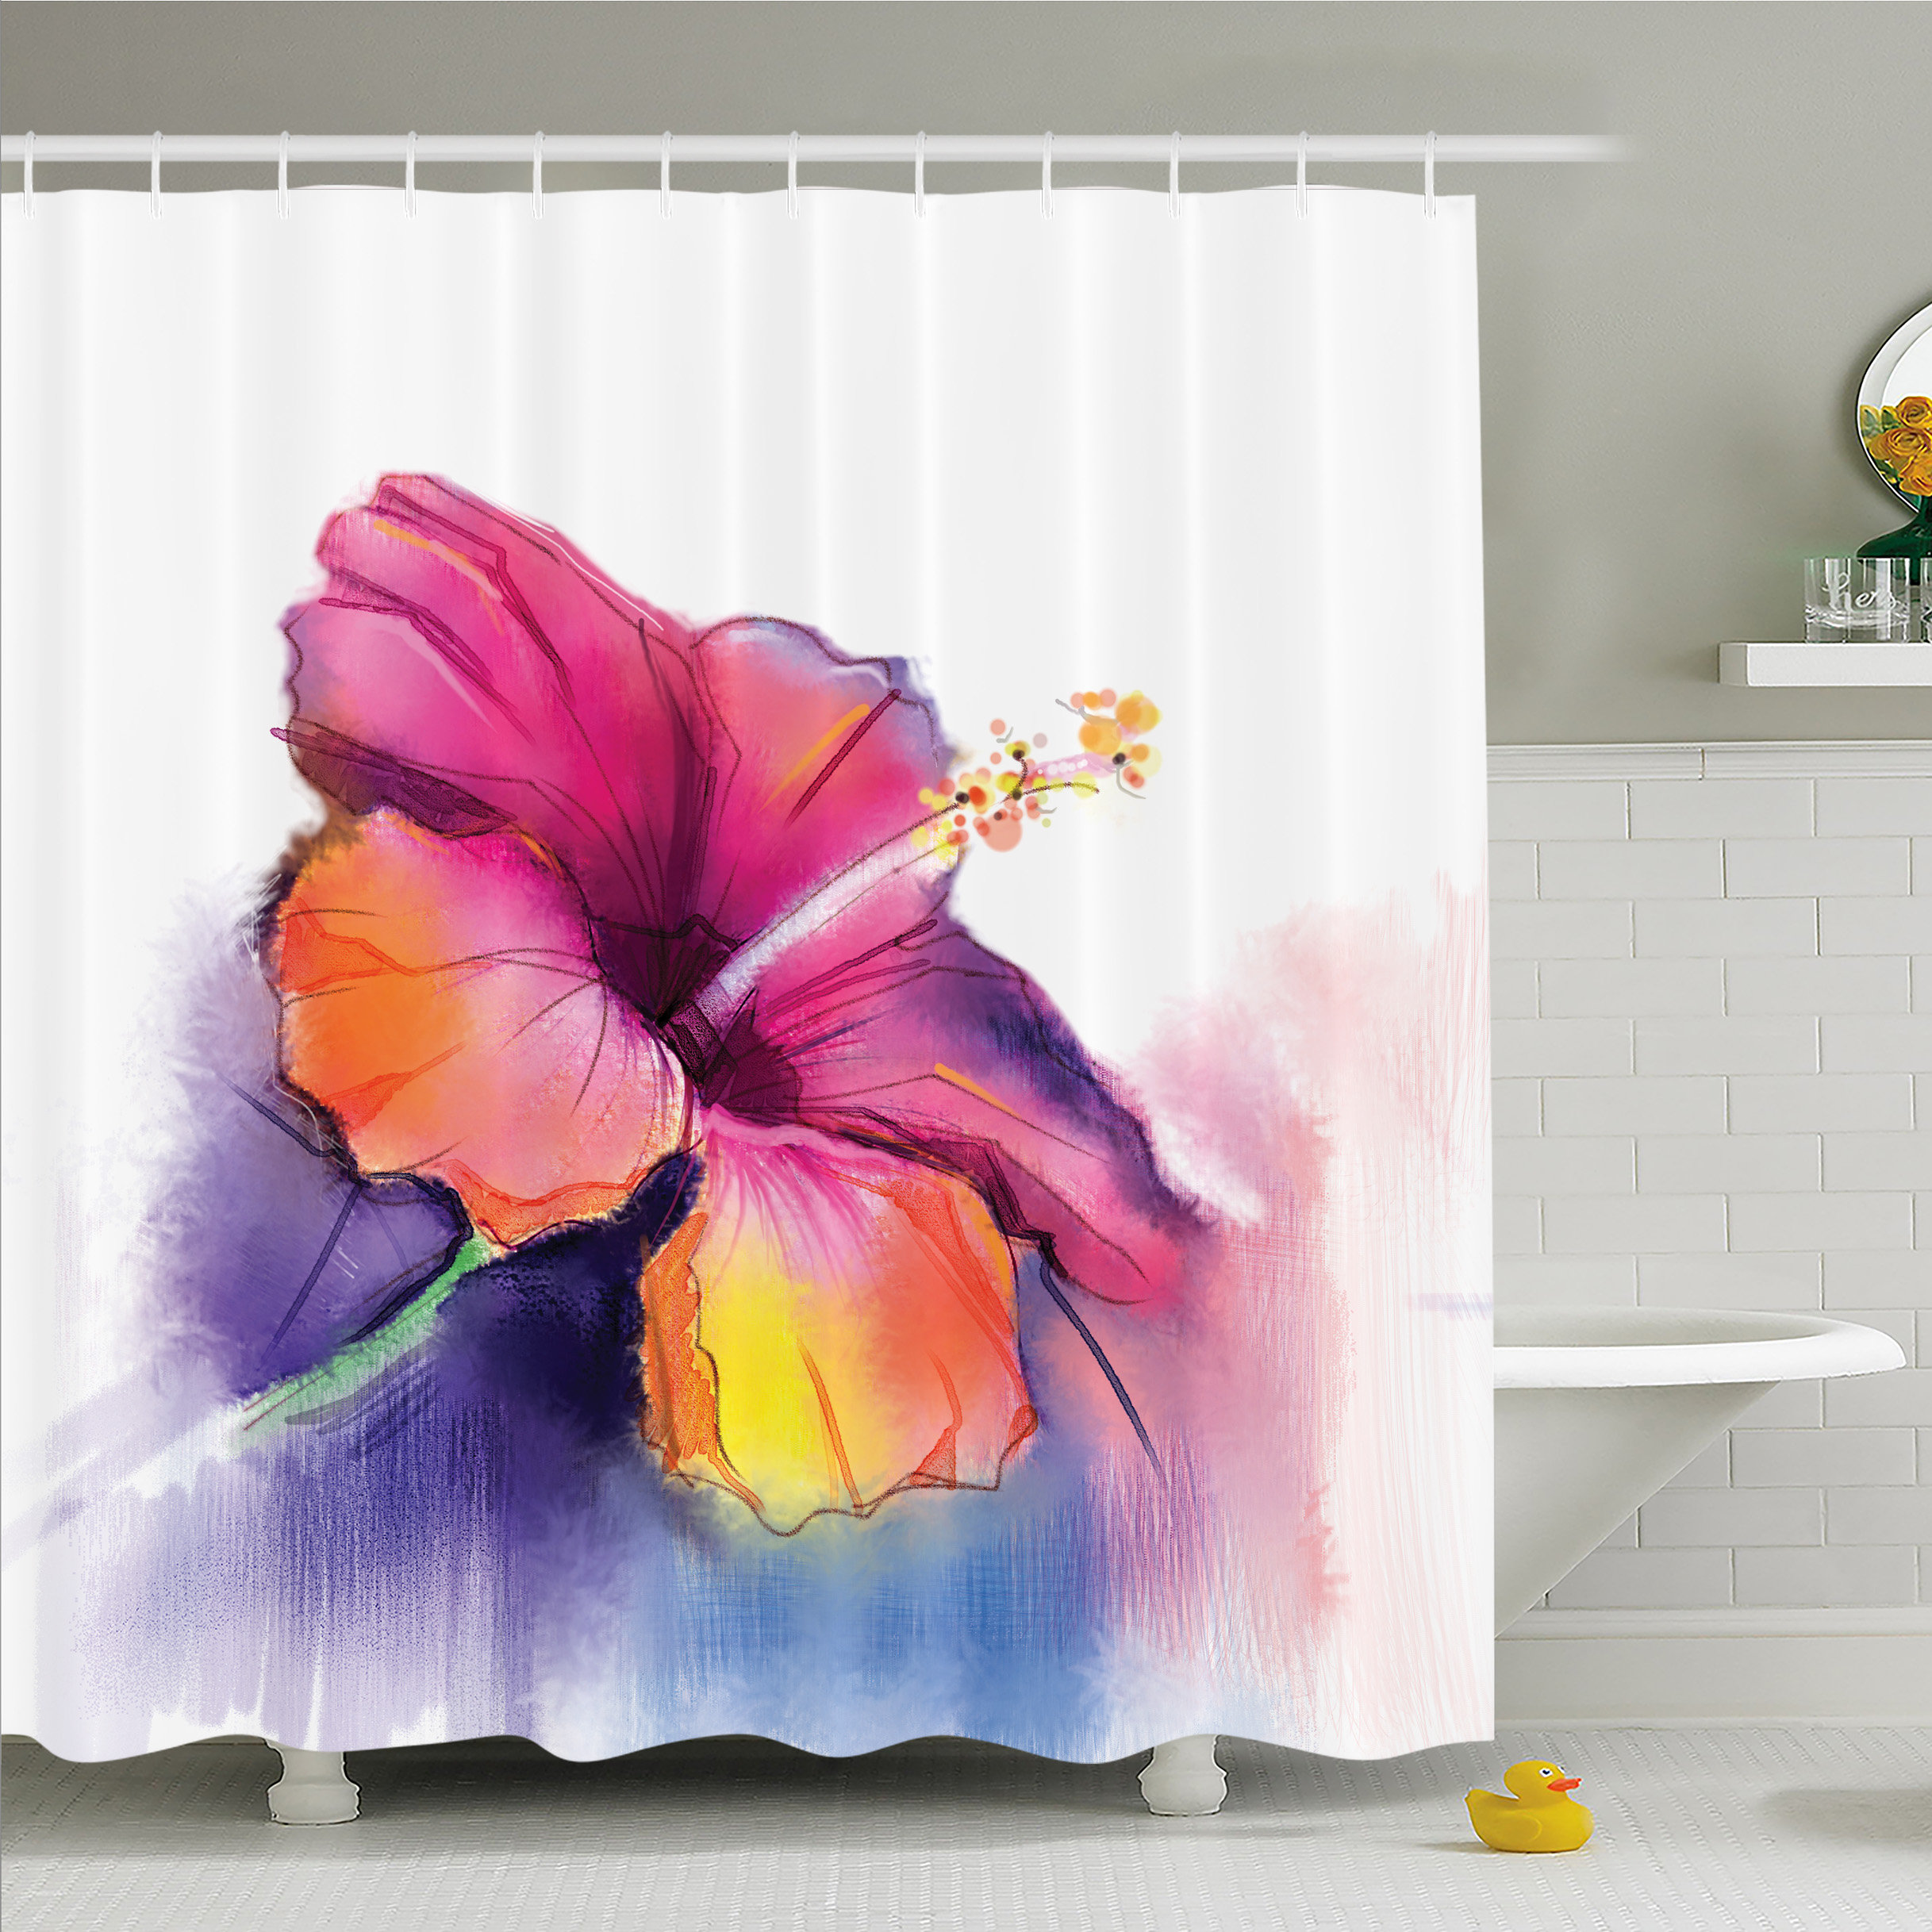 Herbs Floral Plants Shower Curtain Watercolor Wildflowers Delicate Flower Pink 